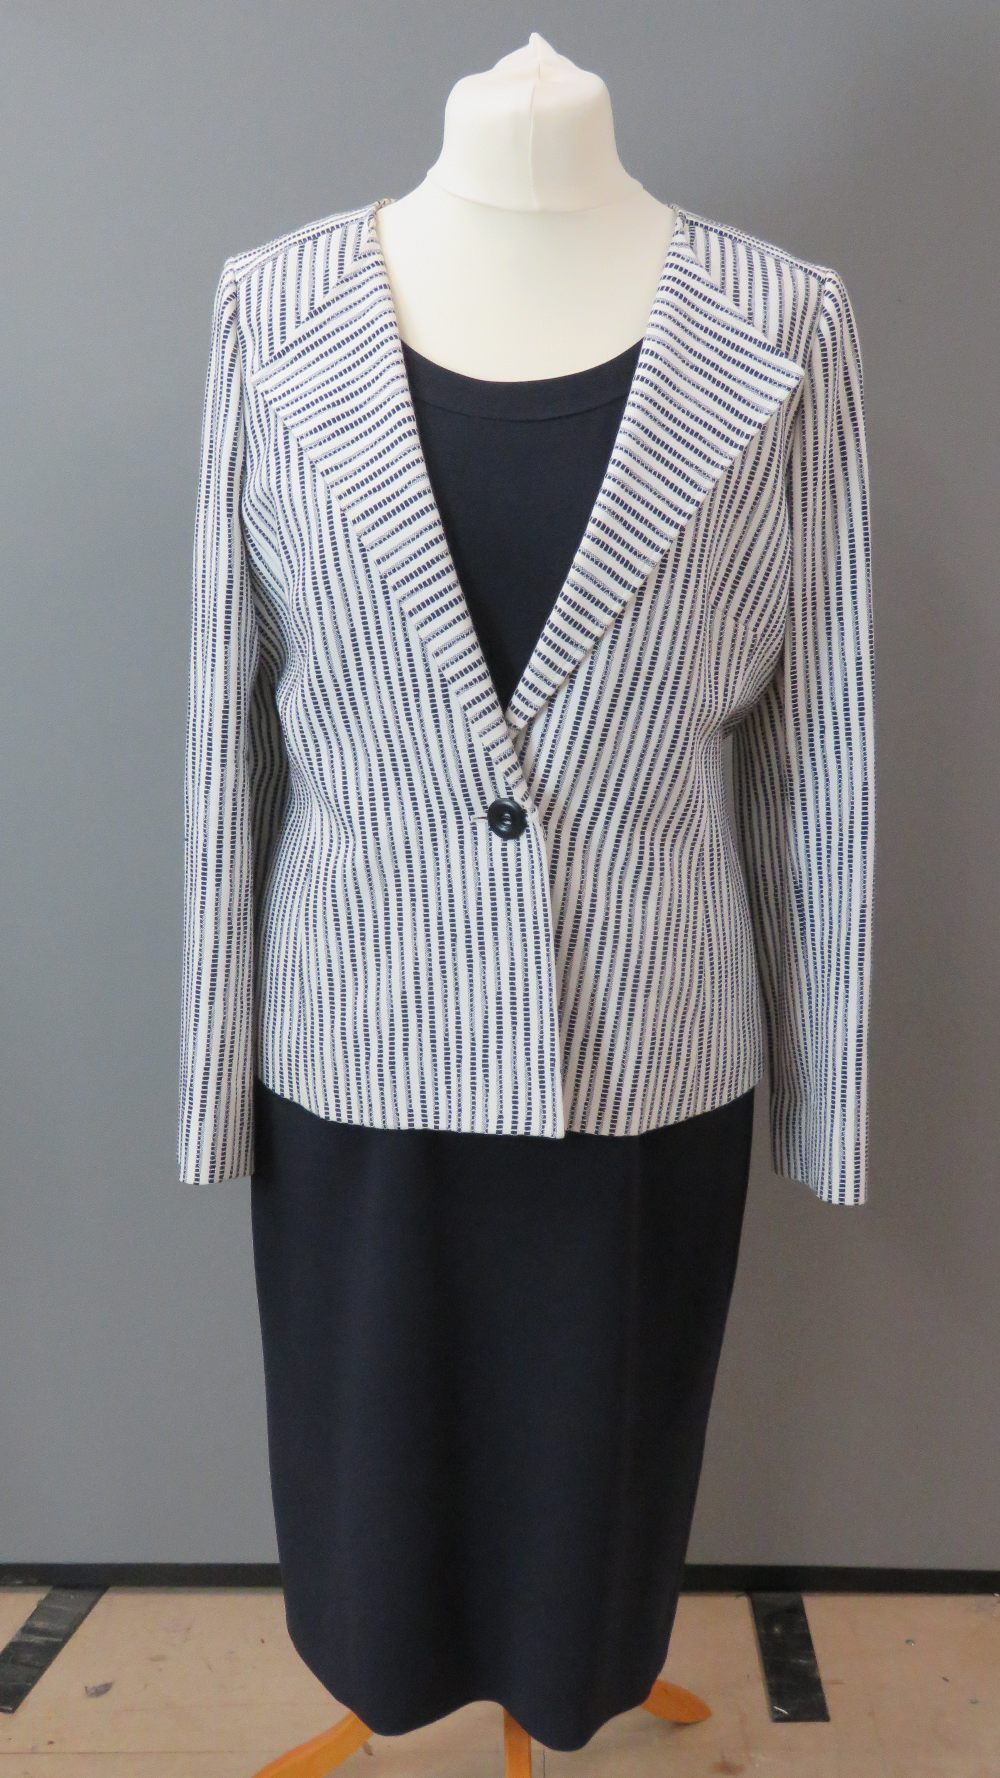 Jaeger; a ladies 100% cotton jacket in navy and white, dry clean only label within,